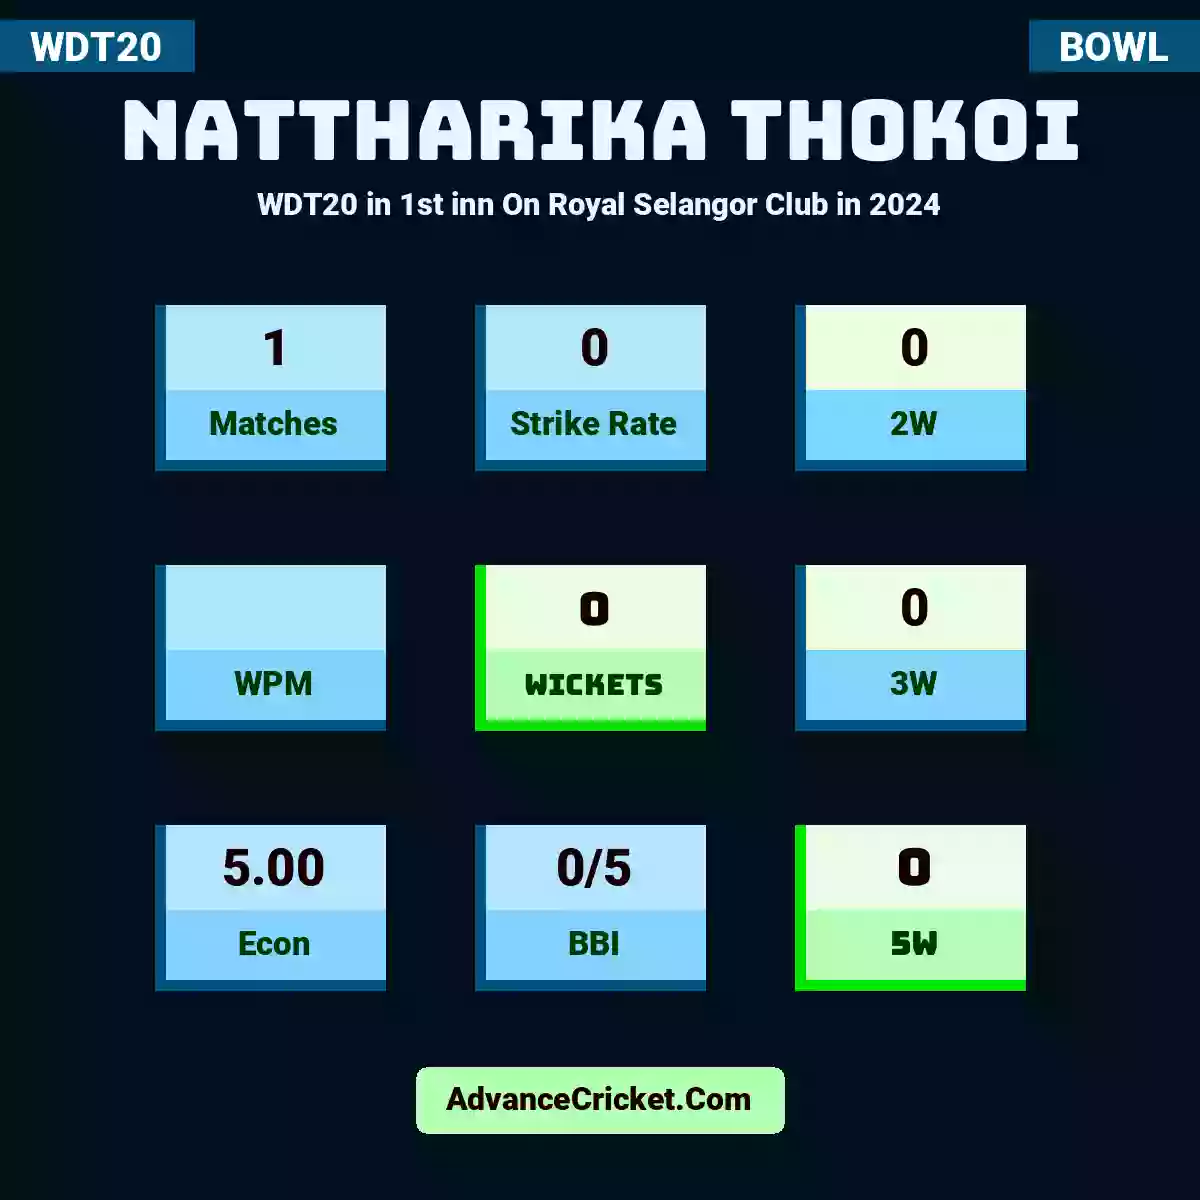 Nattharika Thokoi WDT20  in 1st inn On Royal Selangor Club in 2024, Nattharika Thokoi played 1 match in this WDT20 mode, with a SR of 0. N.Thokoi took 0 2W, with a WPM of . Nattharika Thokoi secured 0 wickets, including 0 3W hauls, with an Econ of 5.00 and Avg of 0. Additionally, N.Thokoi achieved 0